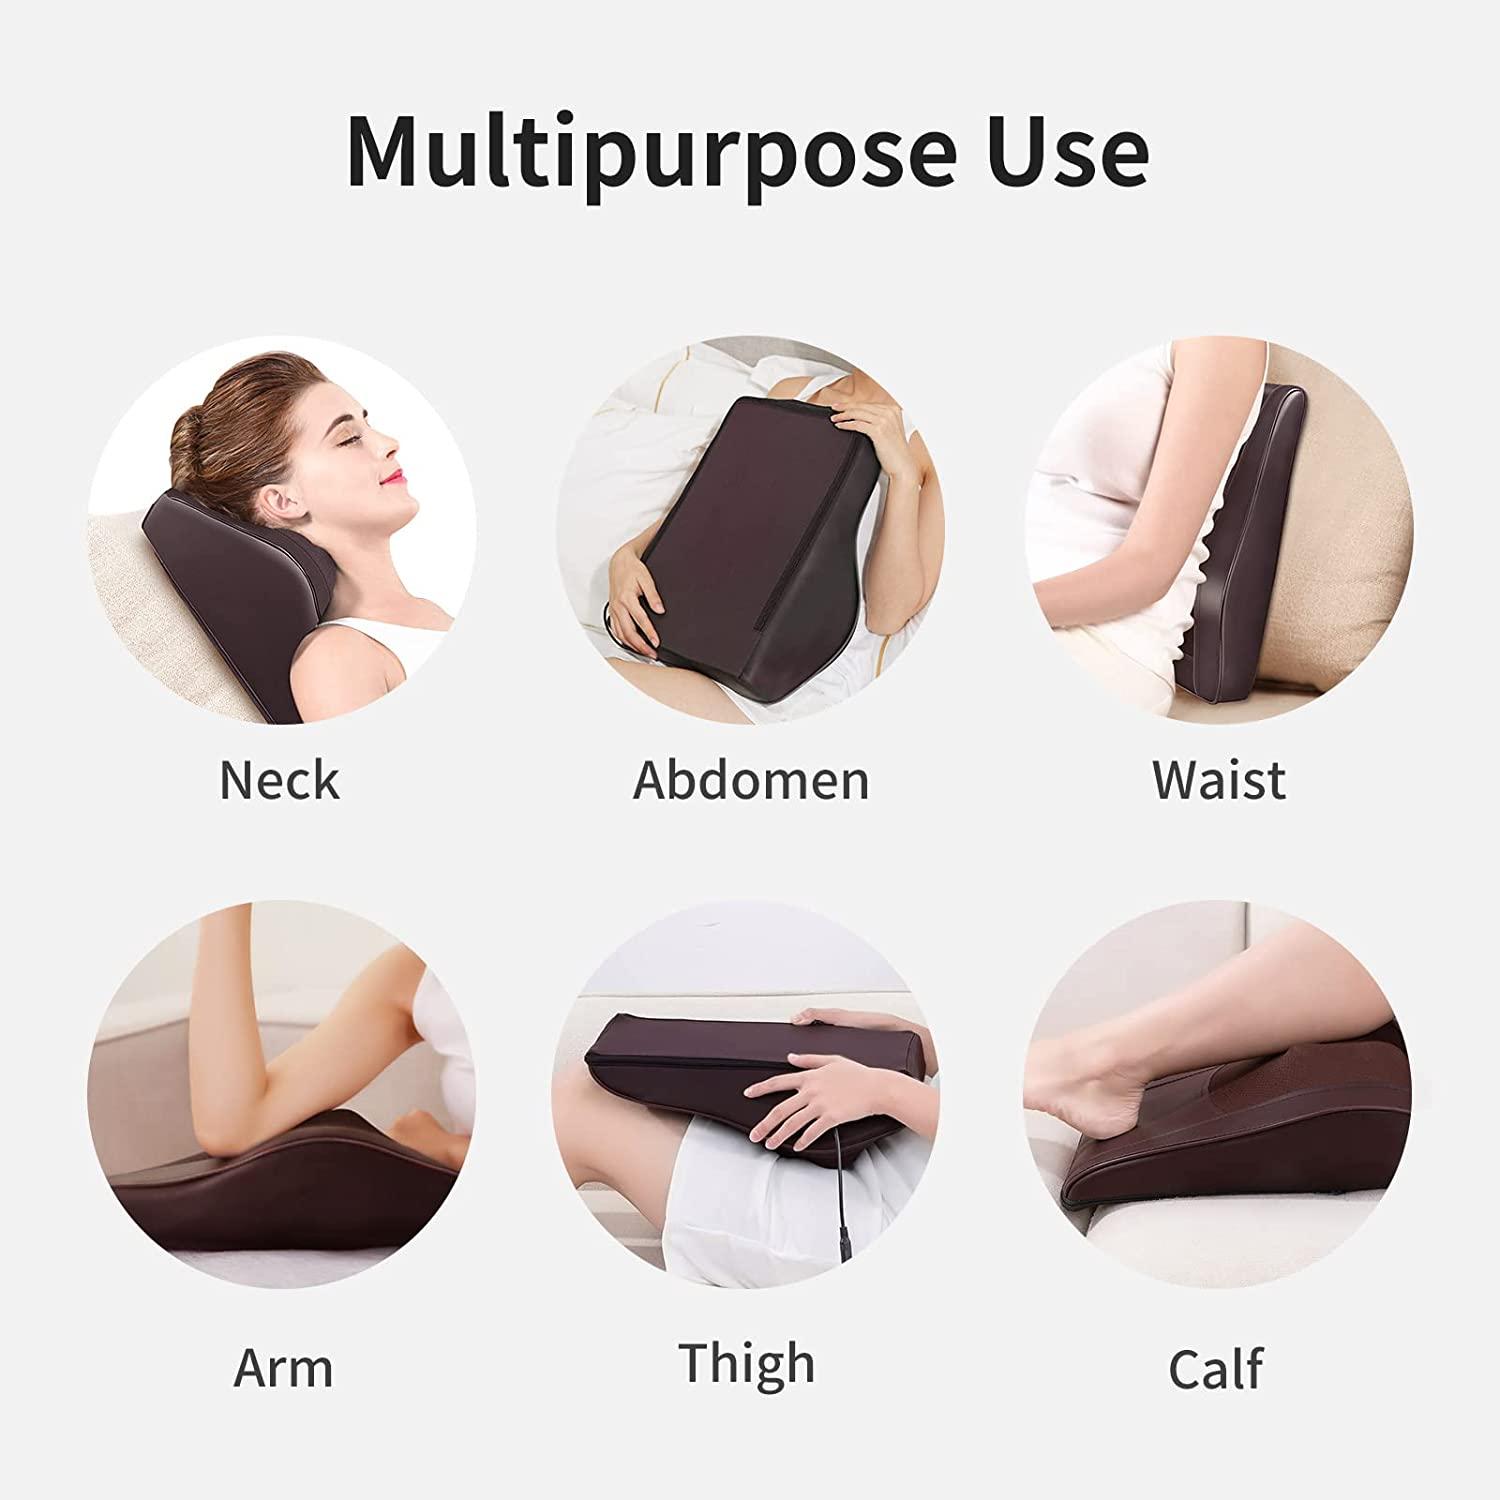  Back Massager, Shiatsu Neck Massager with Heat, Electric Shoulder  Massager, Kneading Massage Pillow for Foot, Leg, Muscle Pain Relief, Get  Well Soon Presents - Christmas Gifts : Health & Household